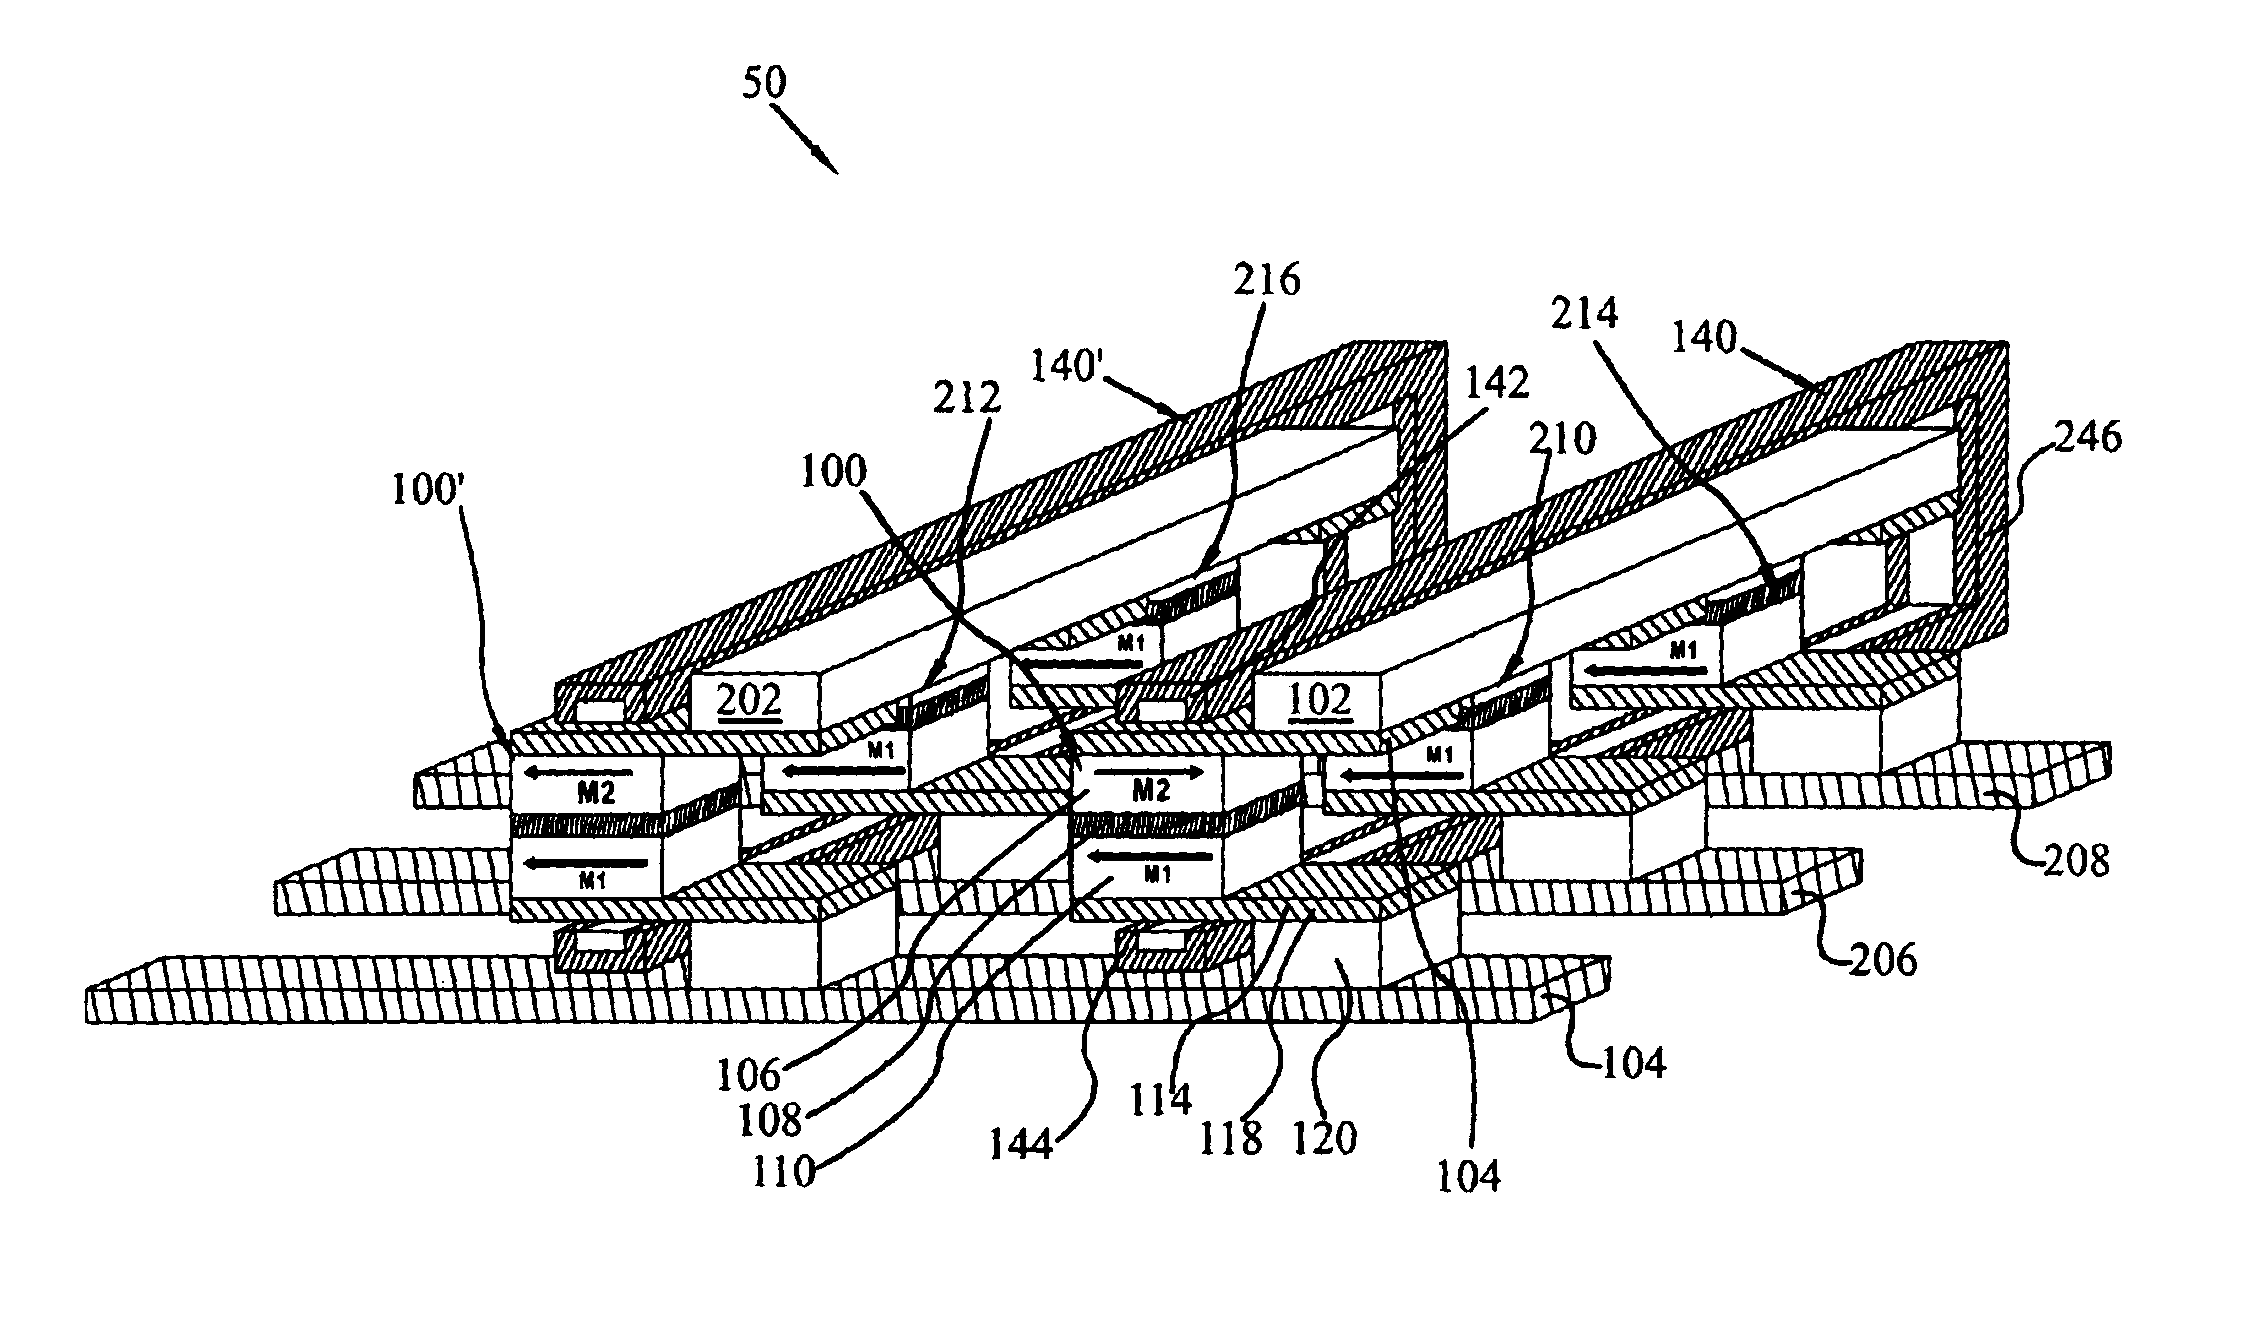 Thermal-assisted switching array configuration for MRAM